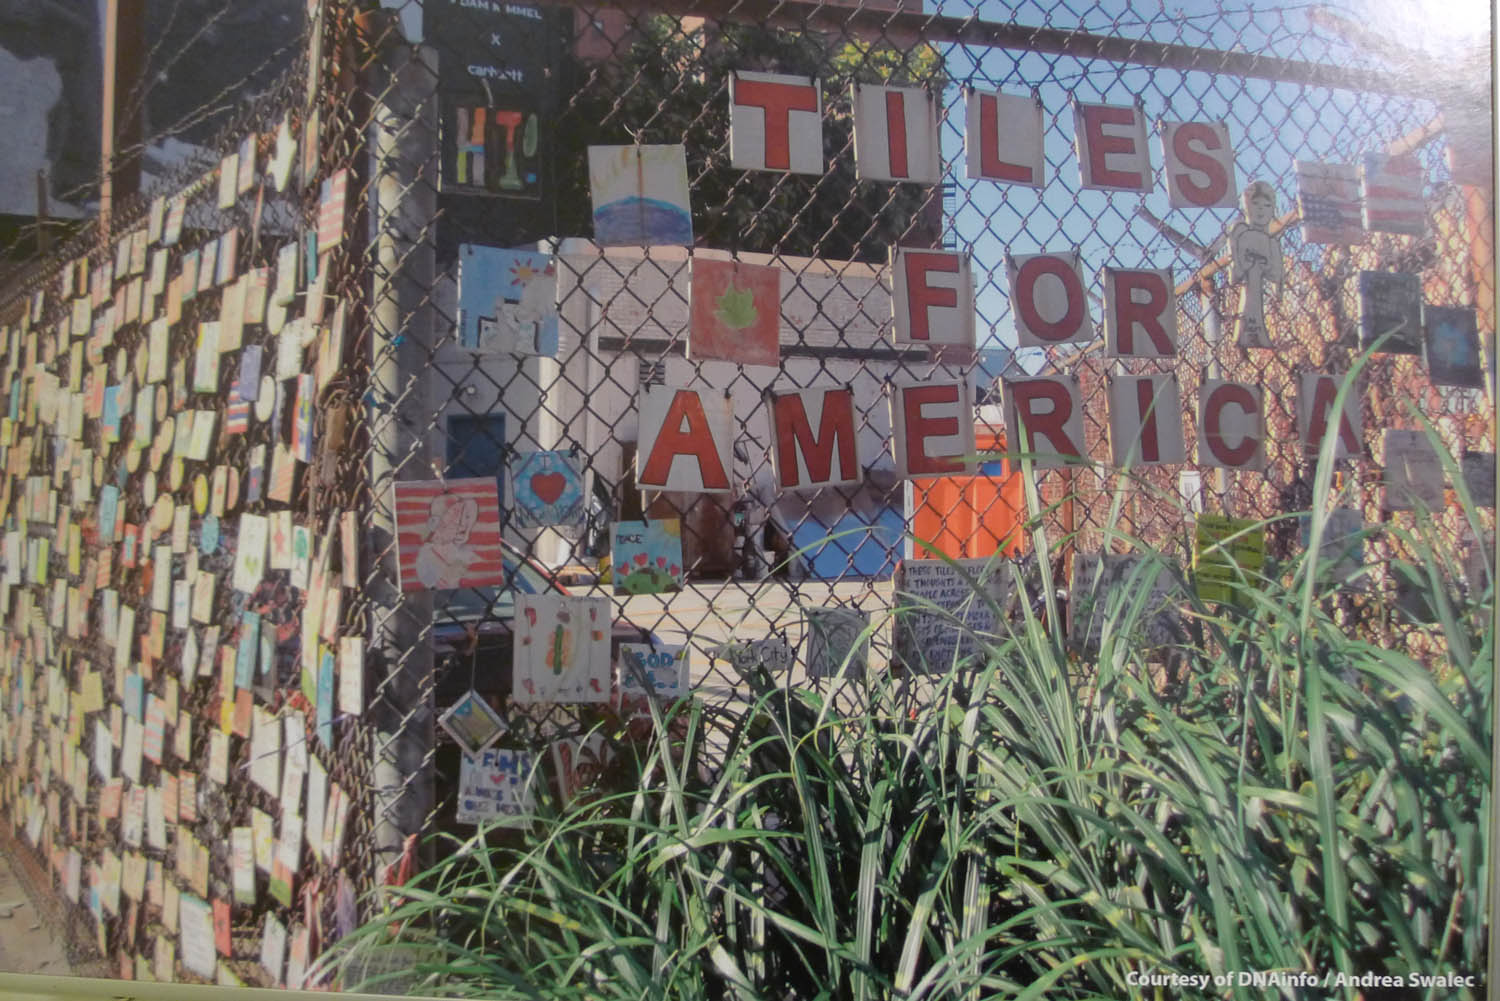 Tiles for America hanging on a fence in the West Village before they were removed